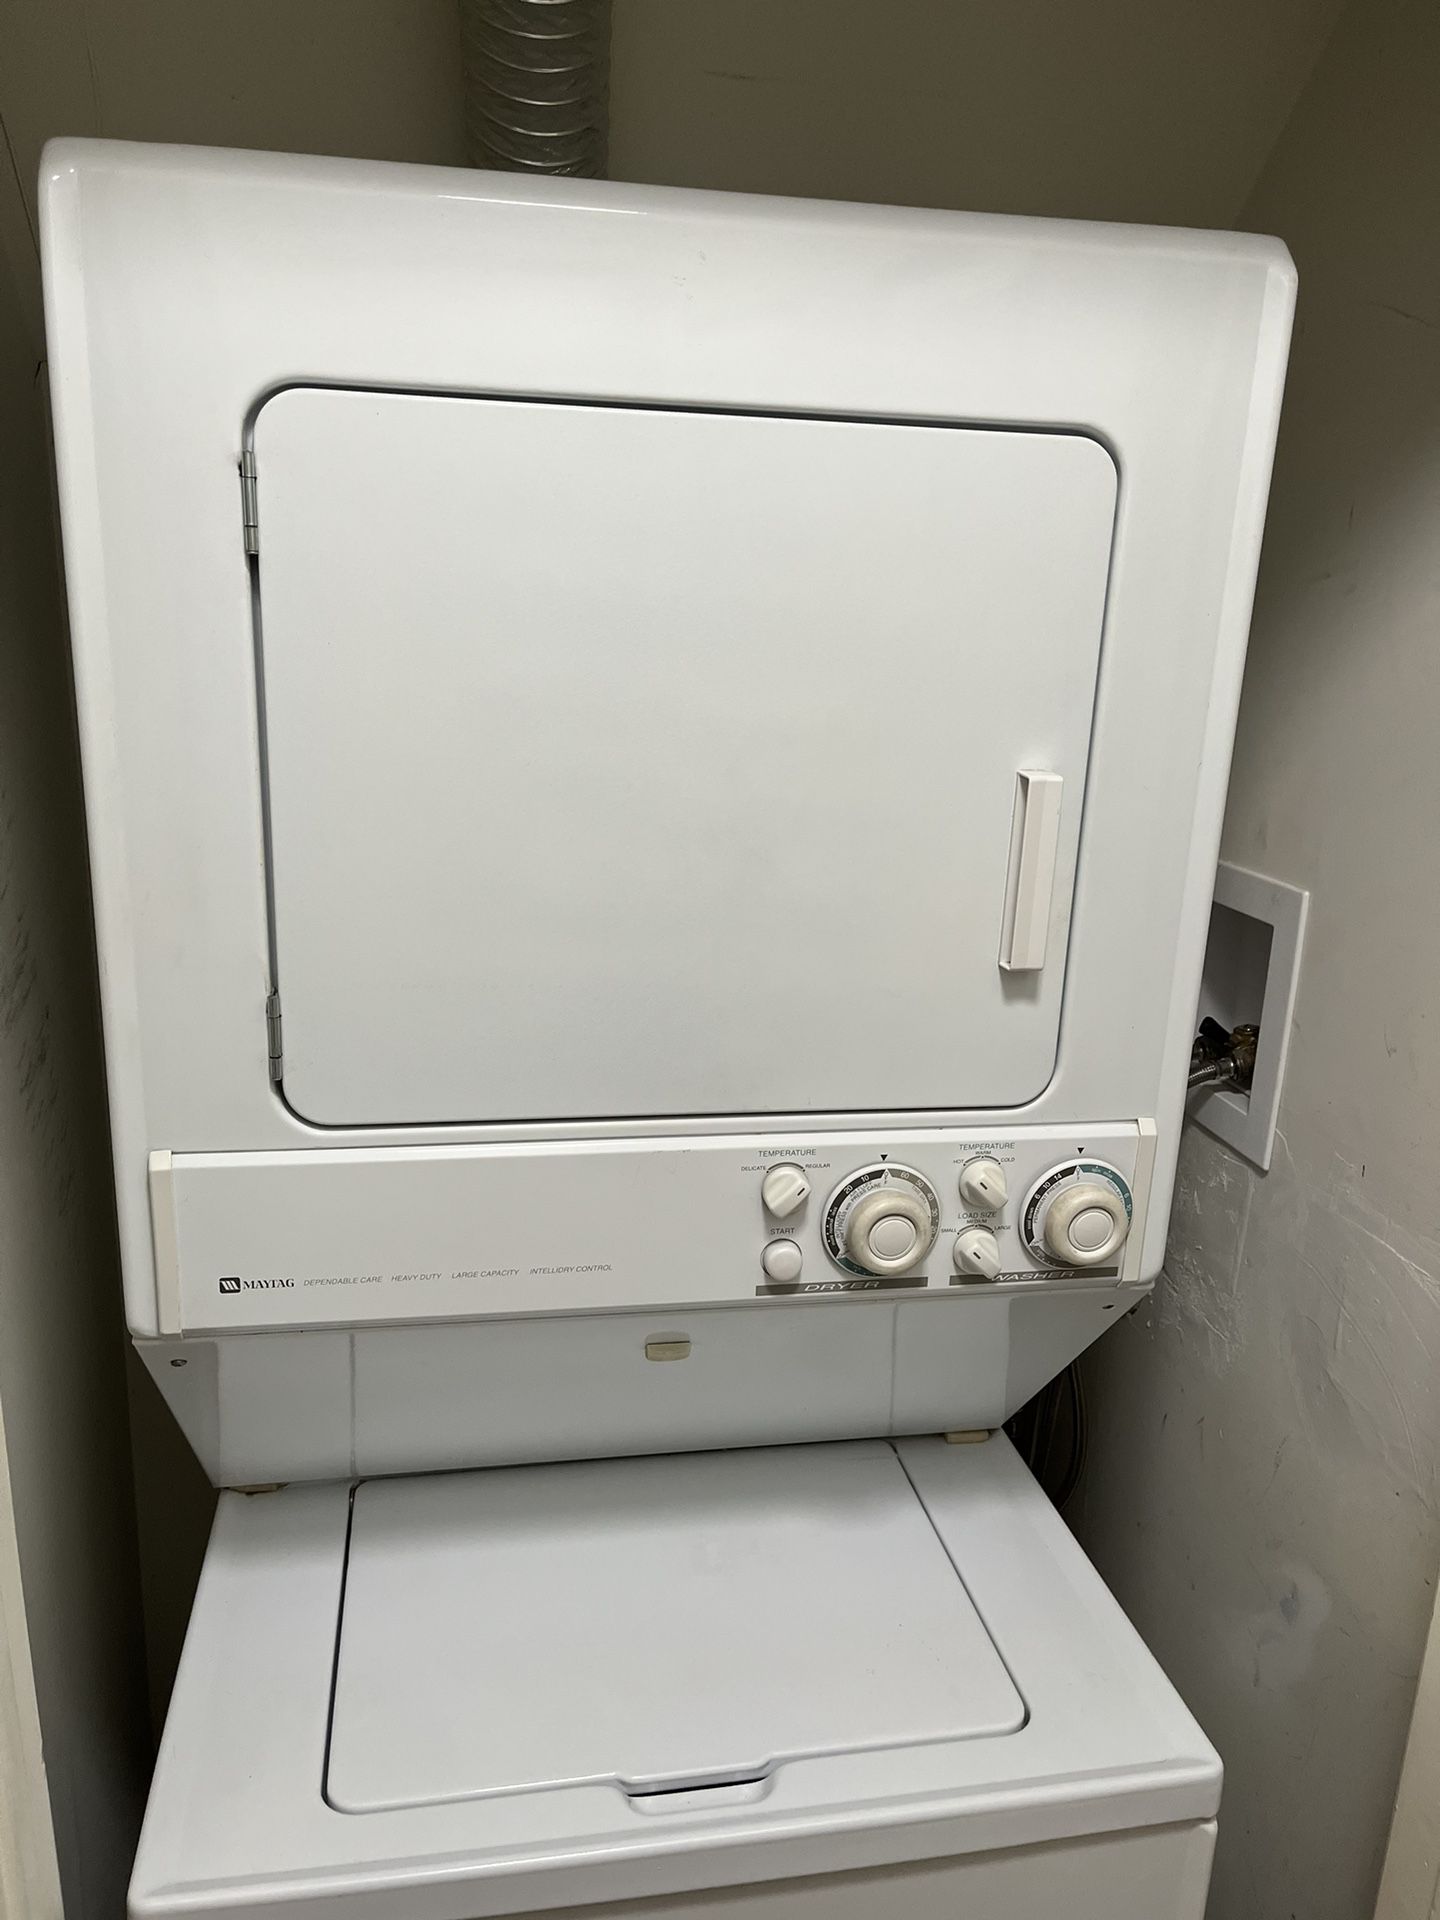 Maytag Washer Dryer Combo